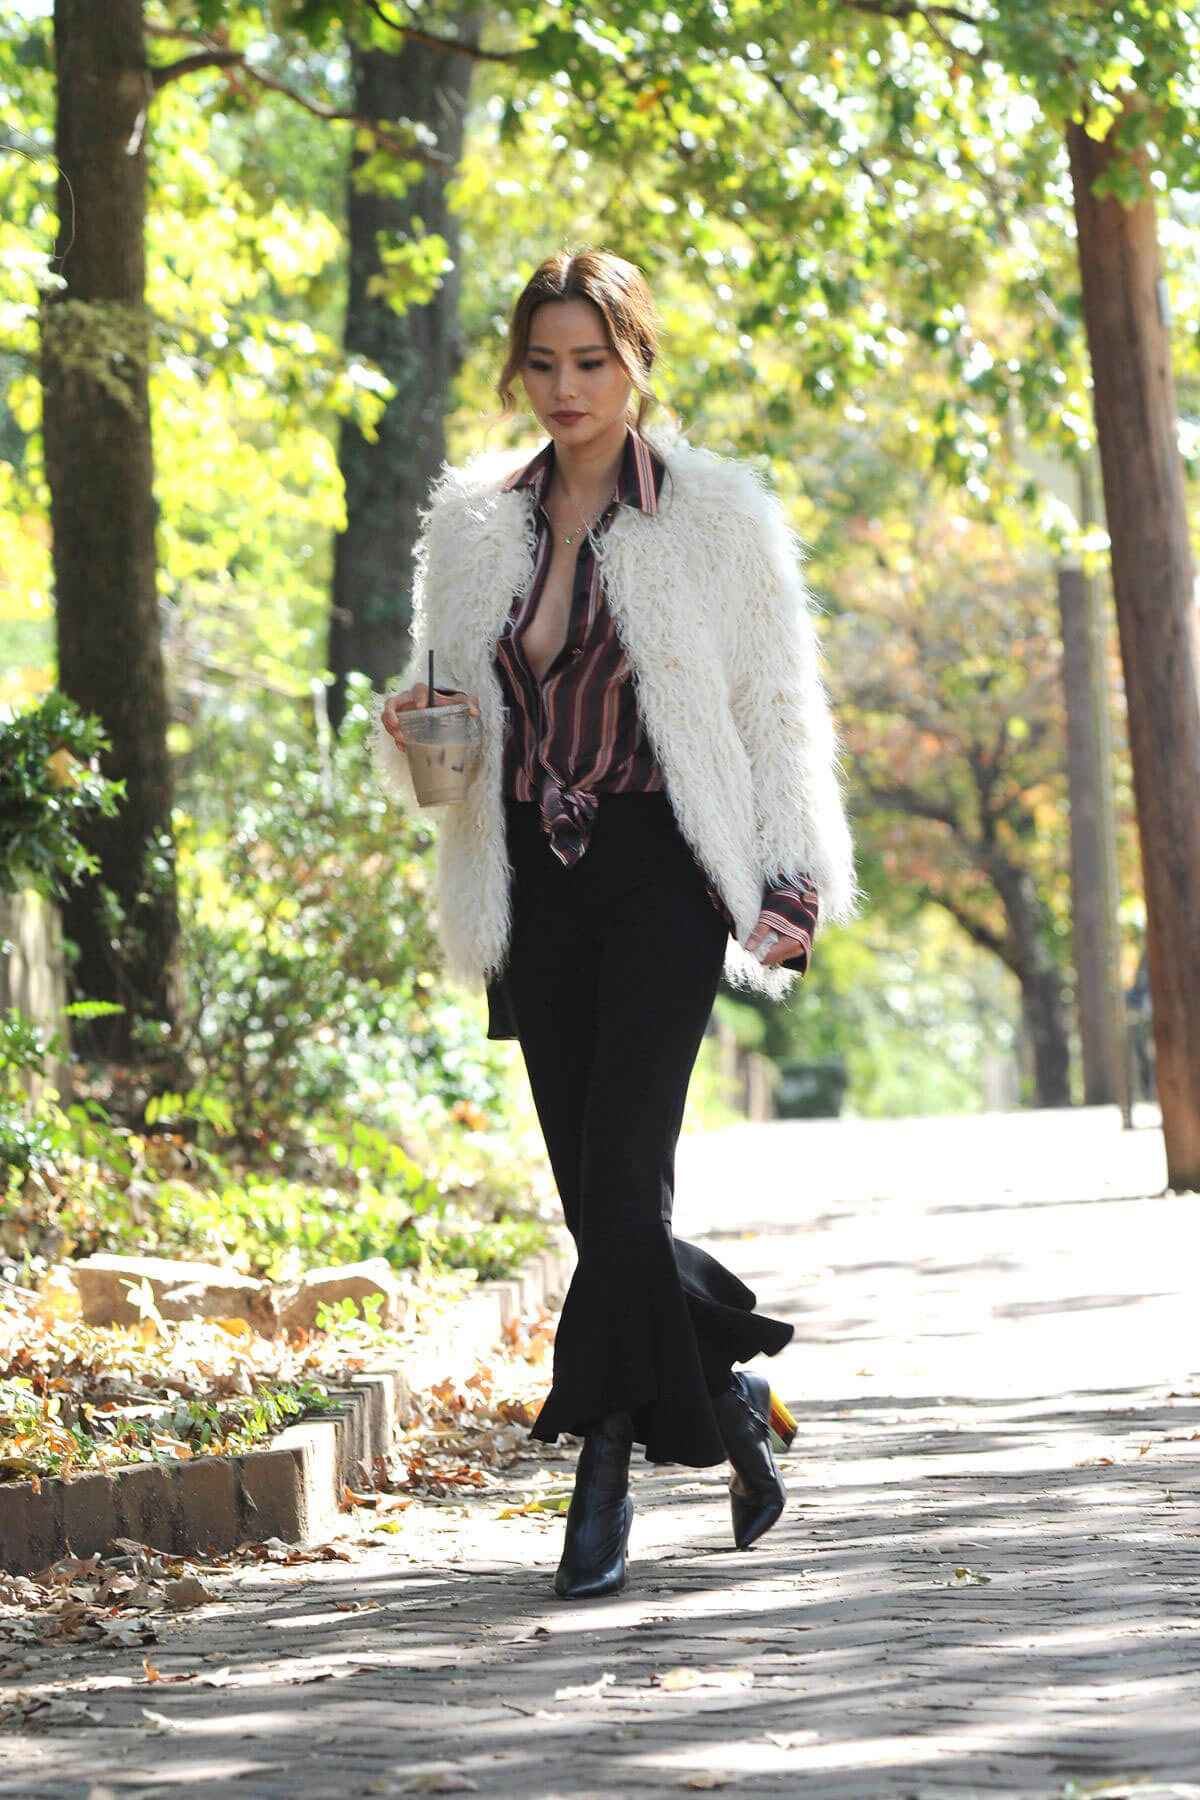 Jamie Chung wears Lining Shirt and Black Pants Out in Atlanta